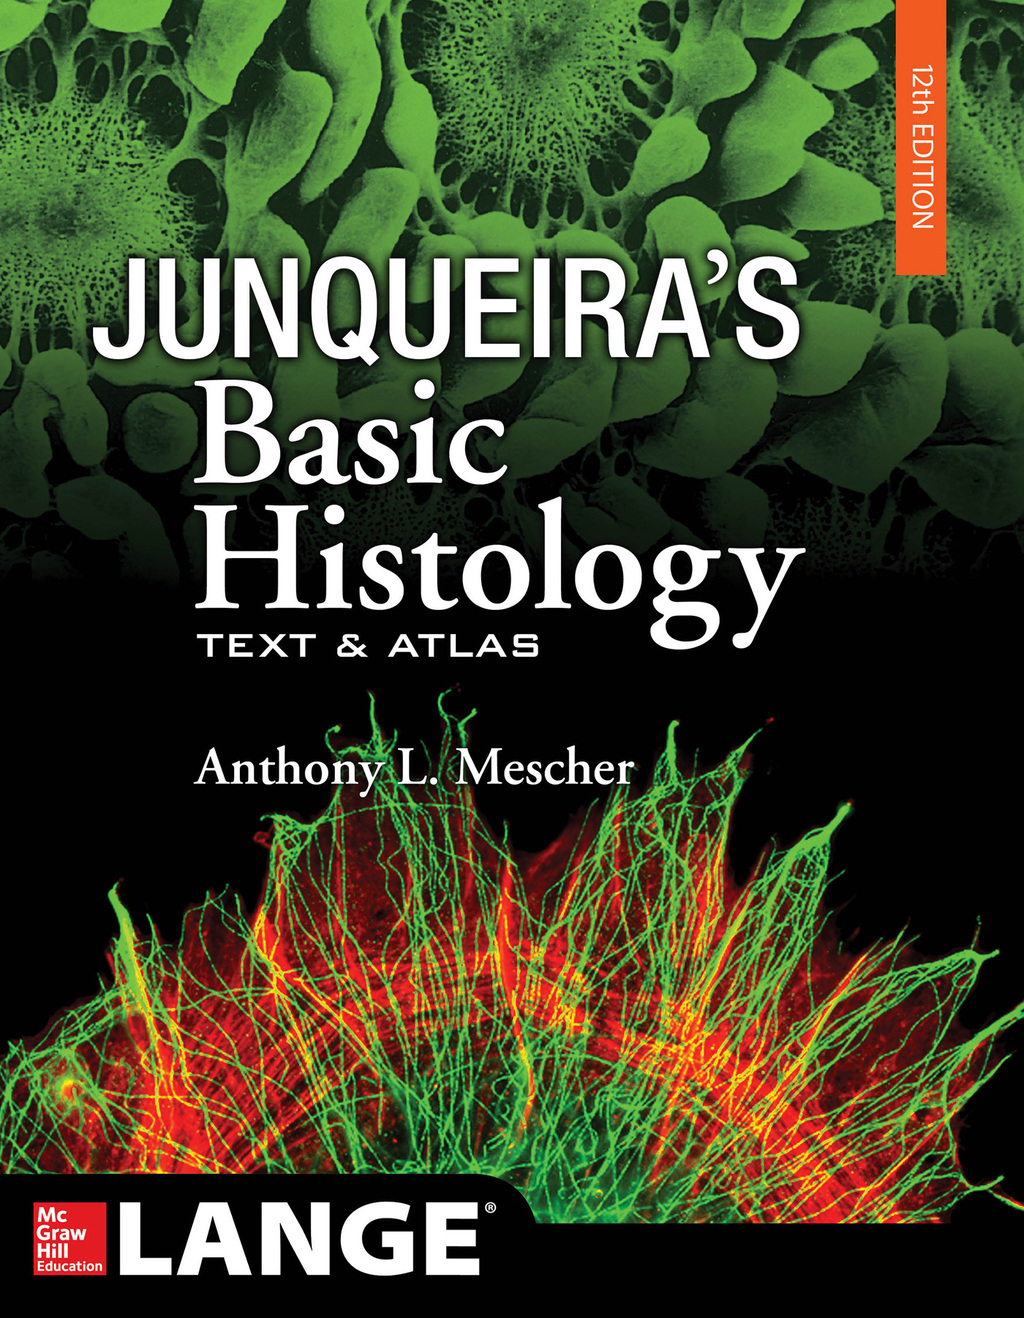 Junqueira's Basic Histology - 12th Edition (eBook)